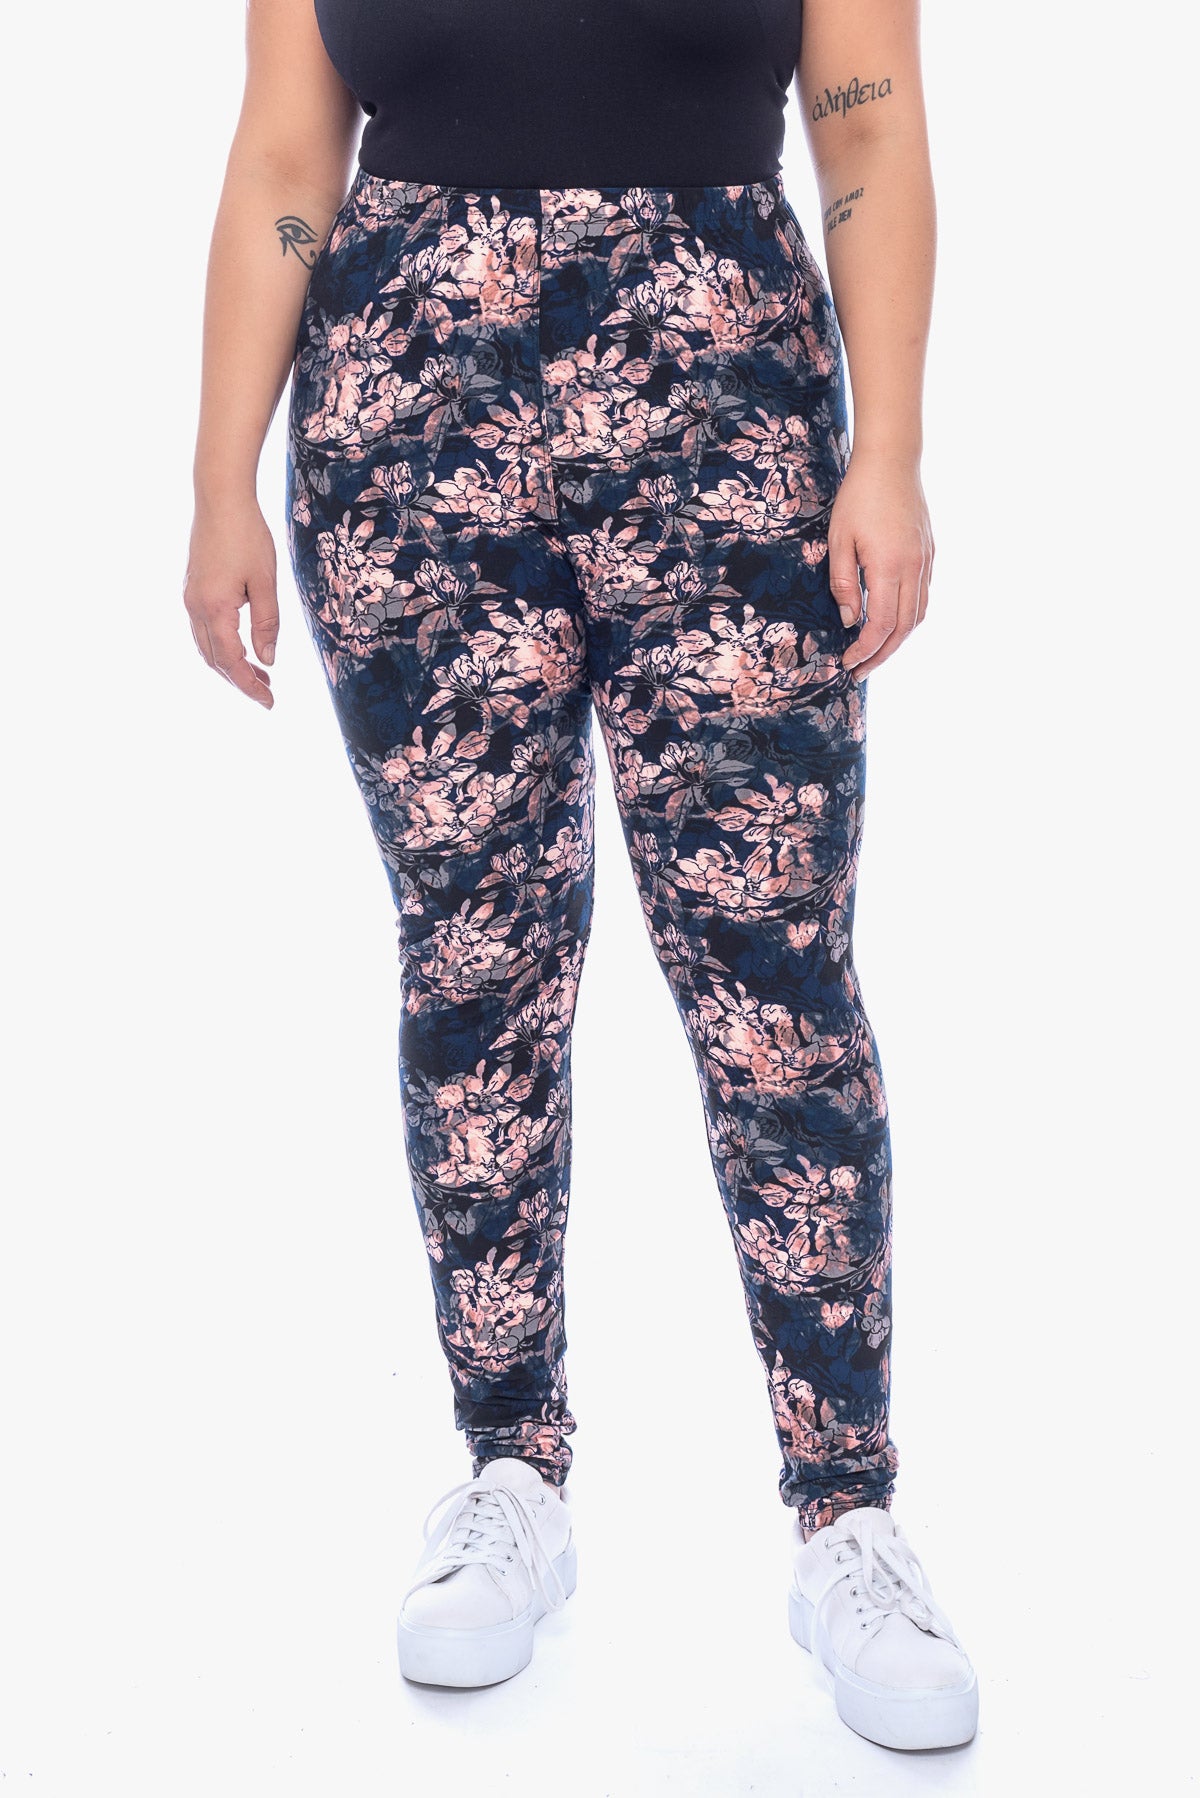 LILLY pink & blue leggings